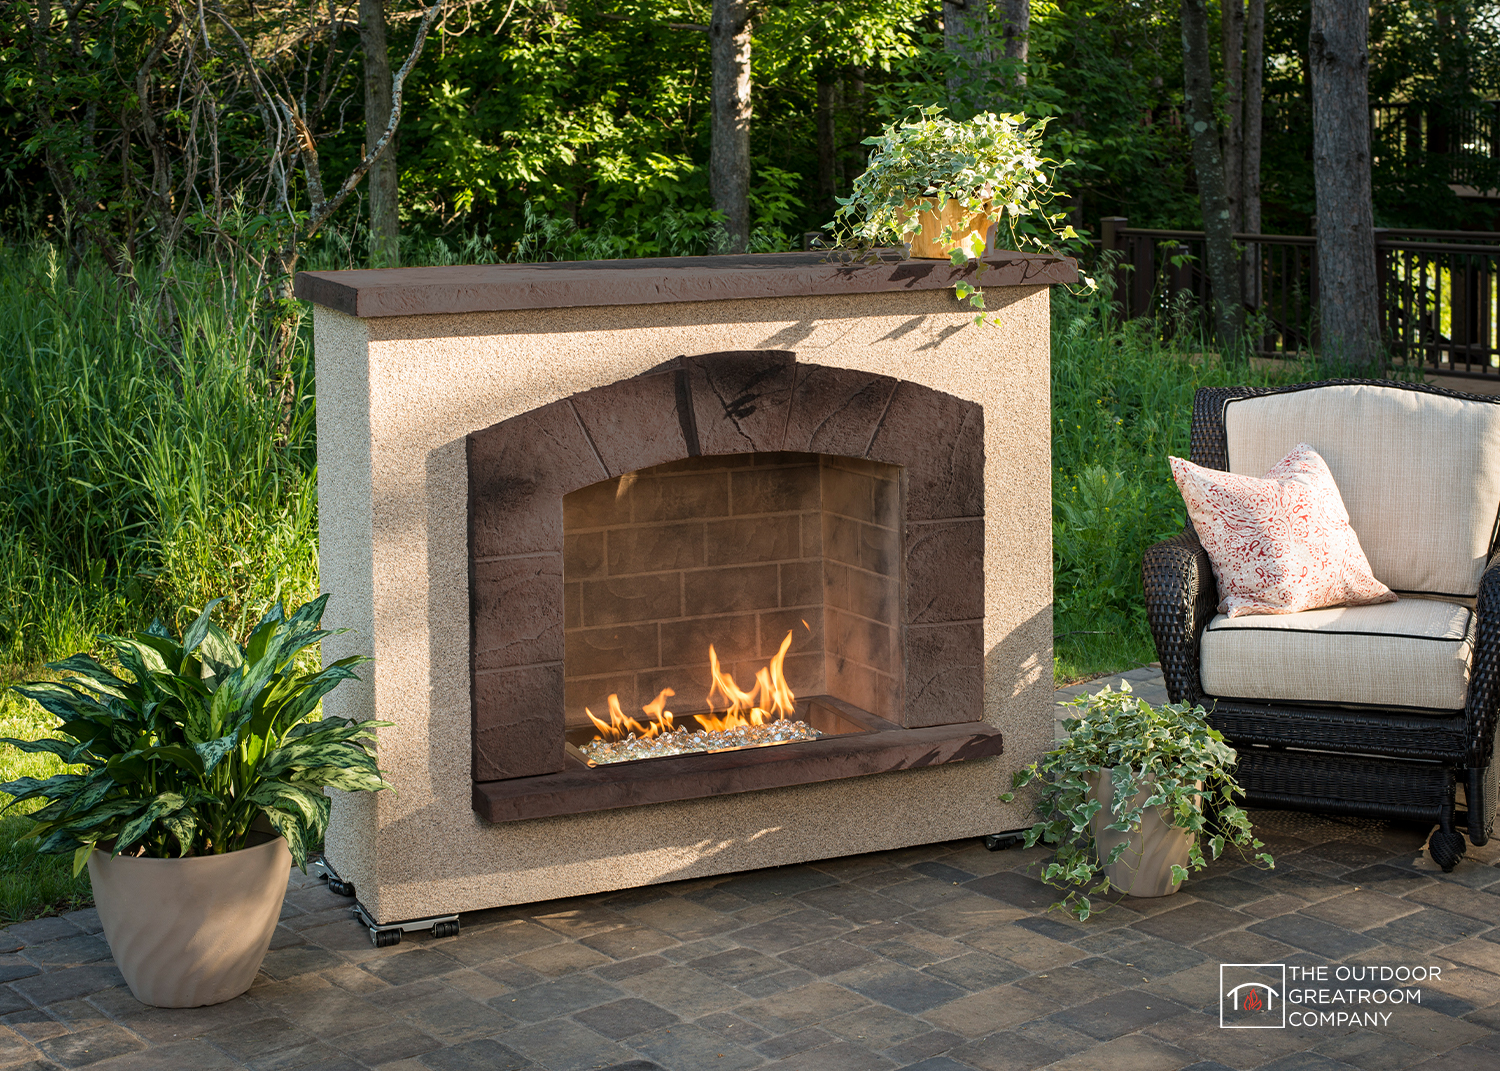 The Outdoor Great Company Fireplace